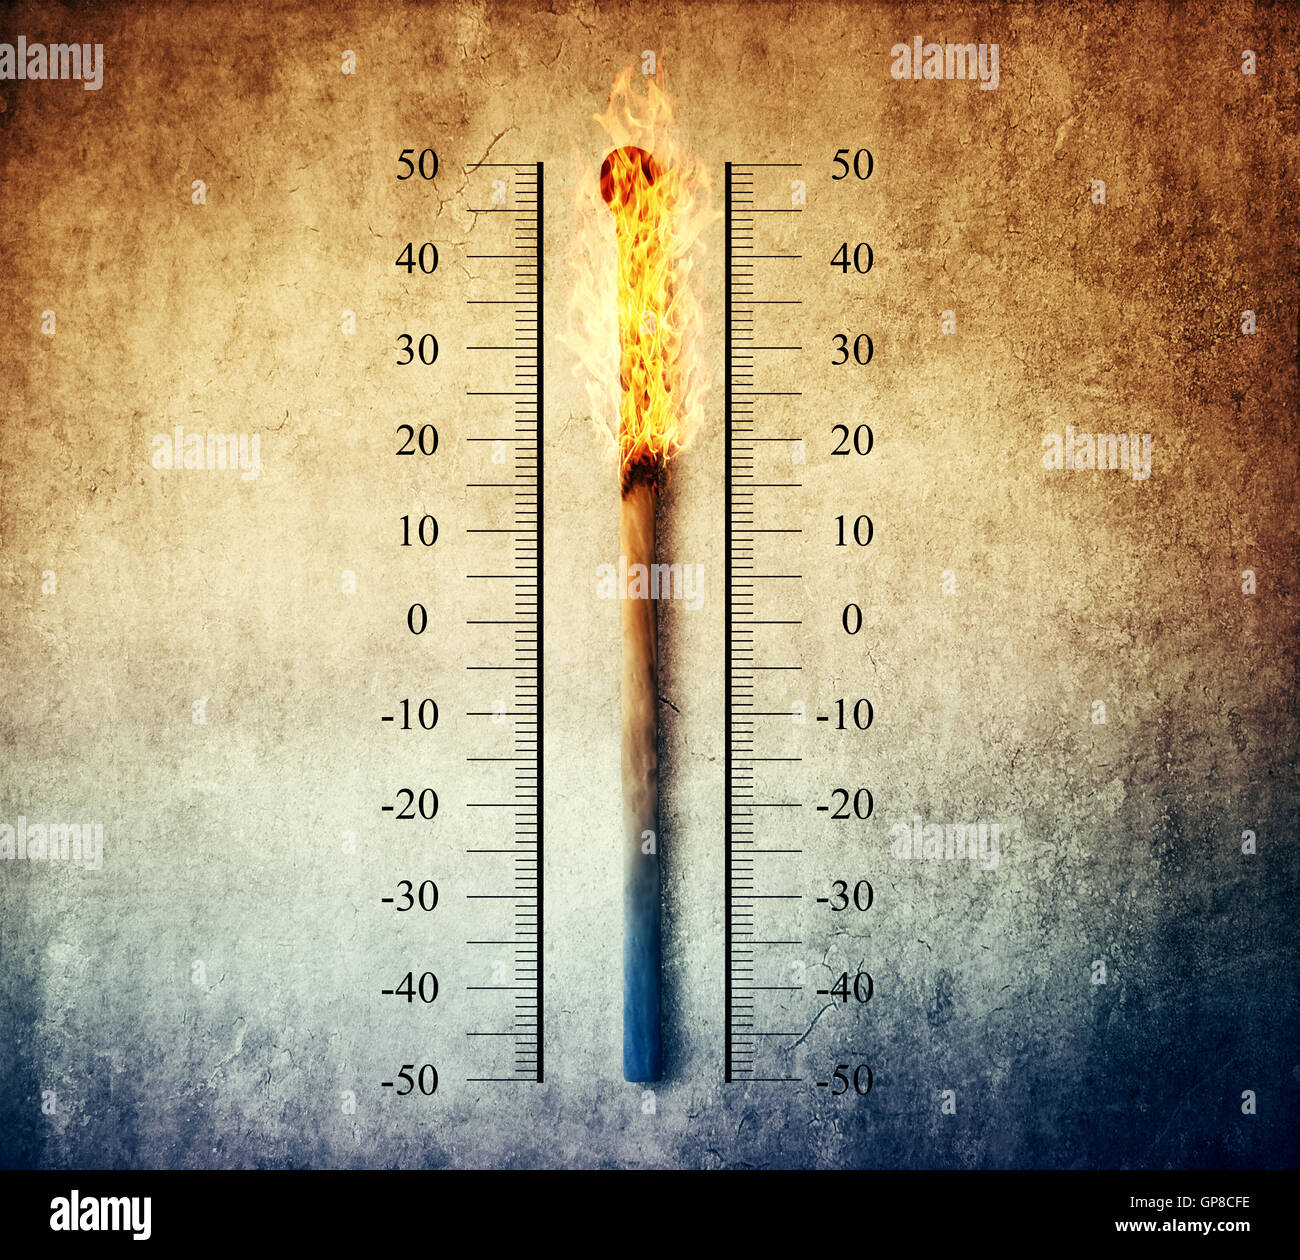 Burned match indicating temperature on a scale as a thermometer. Global warming and temperature rising concept Stock Photo